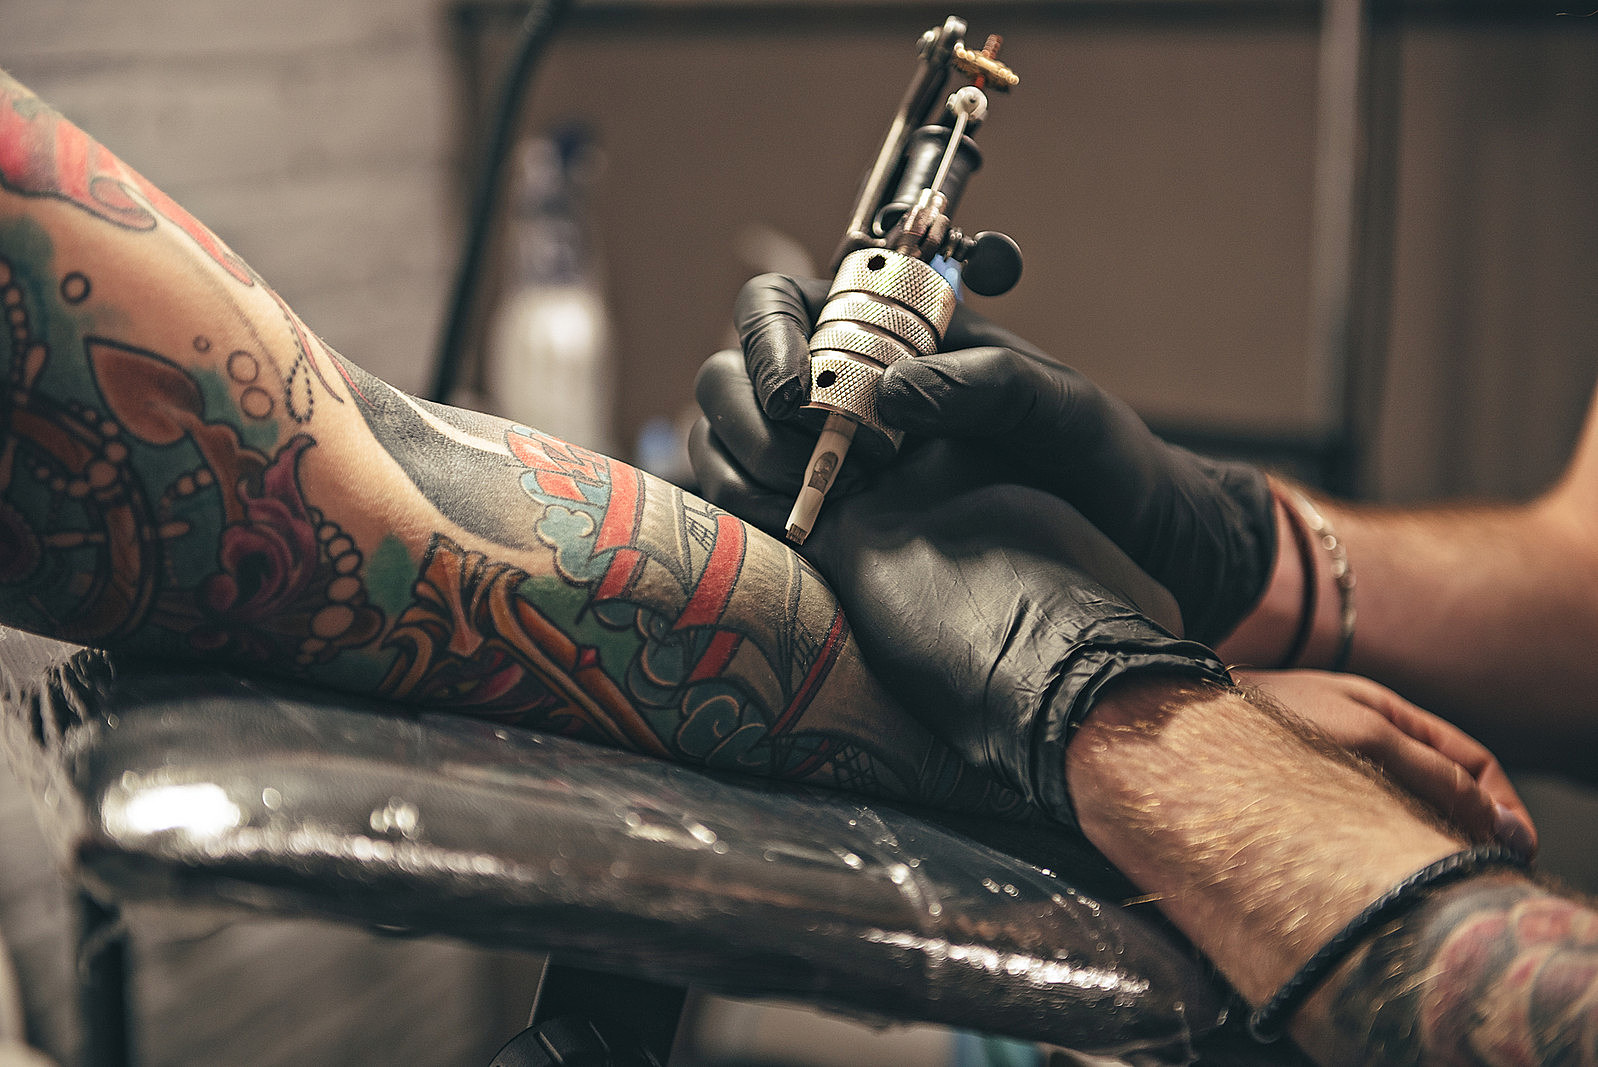 Lansing tattoo shops cut ties with artists after allegations